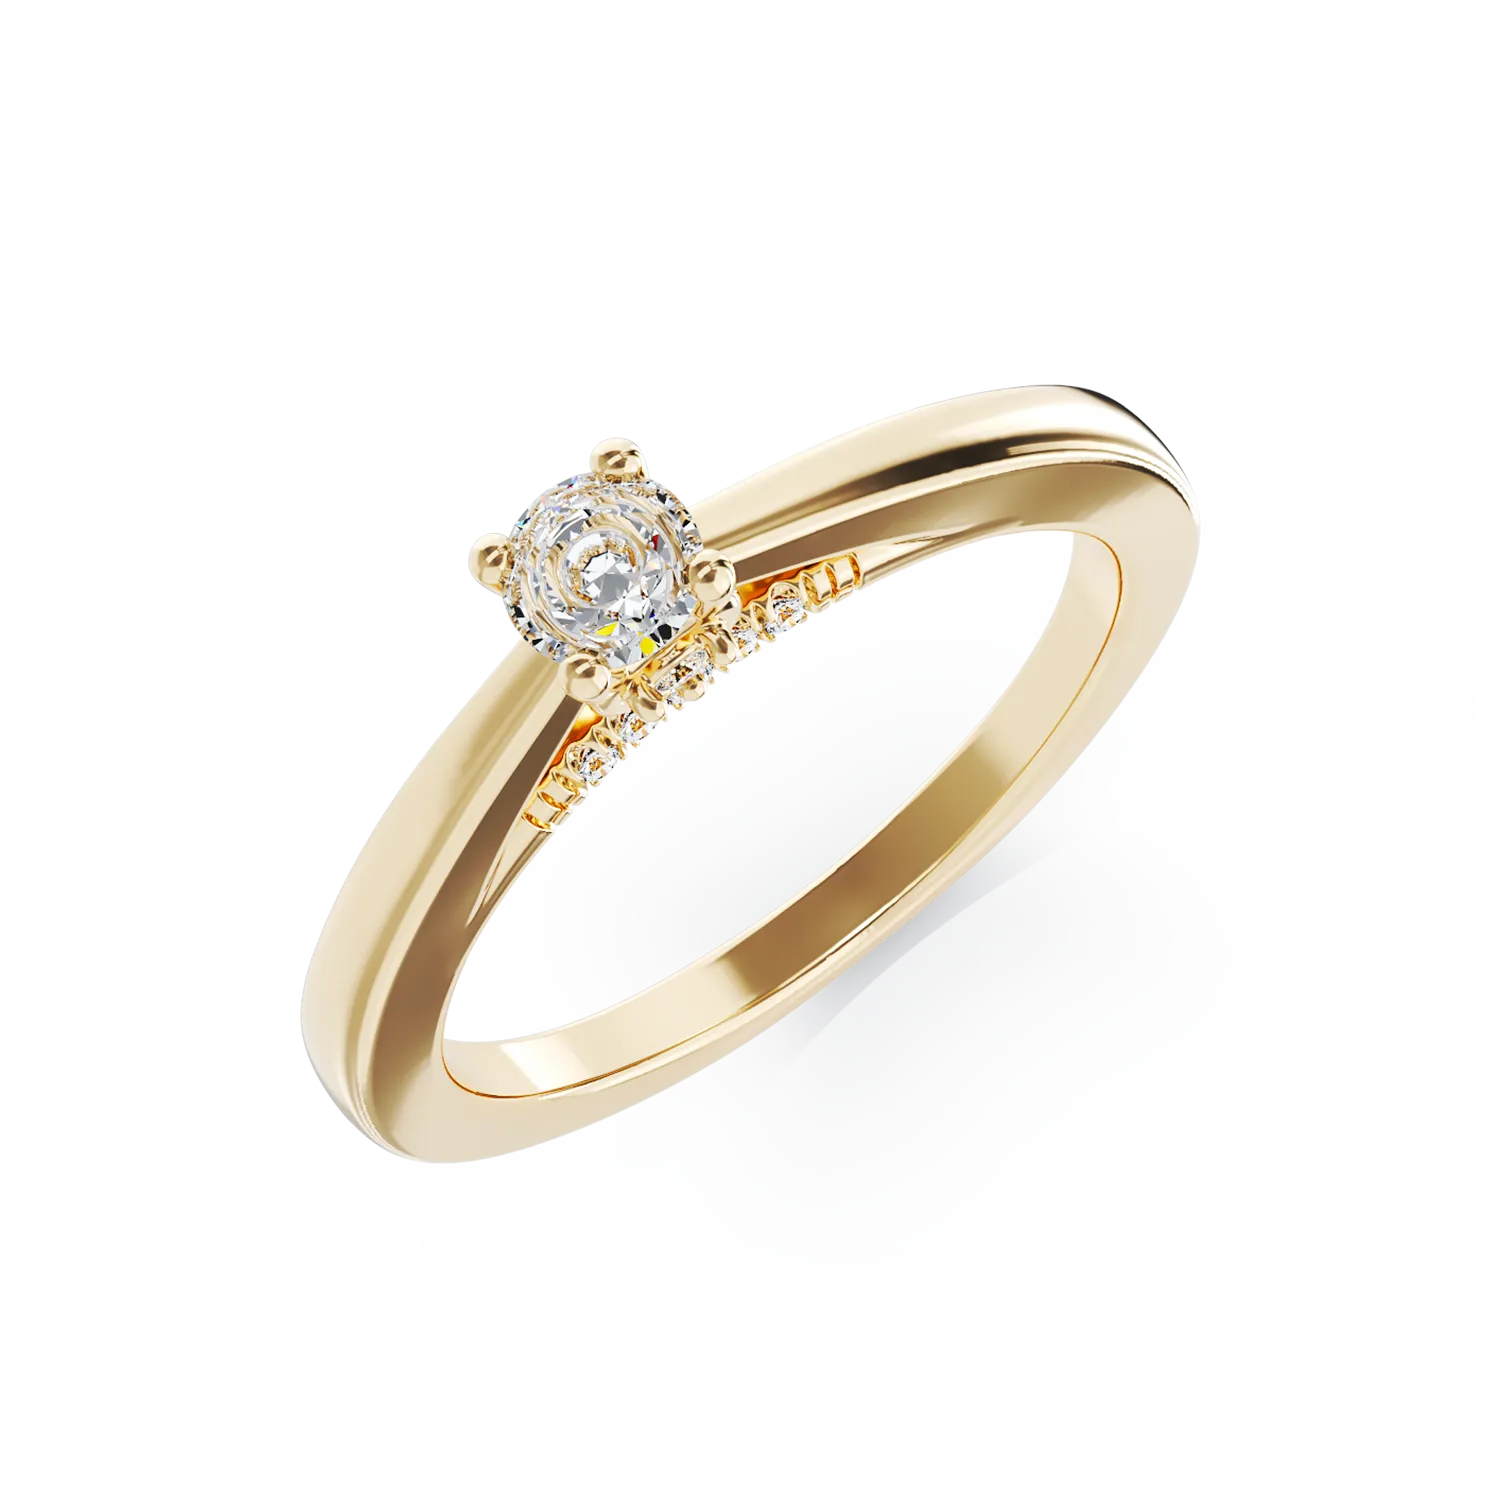 18K yellow gold engagement ring with 0.2ct diamond and 0.04ct diamonds